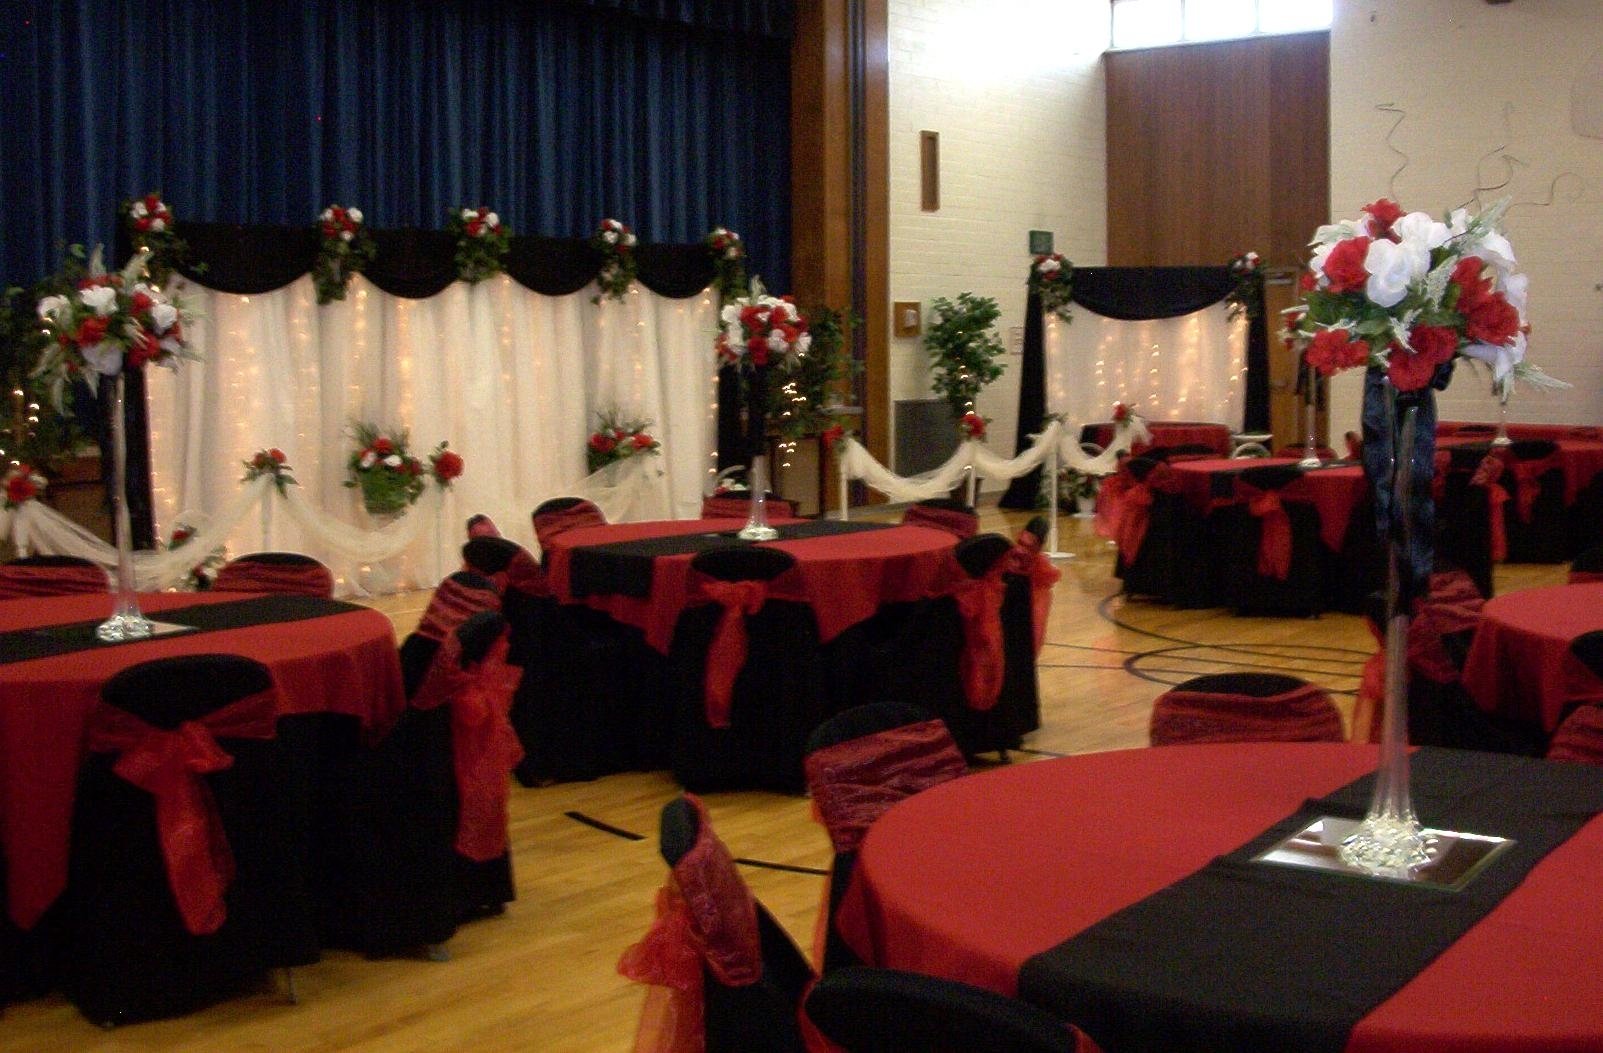 10 Attractive Red And Black Wedding Ideas red and black wedding centerpieces wedding ideas uxjj 2022